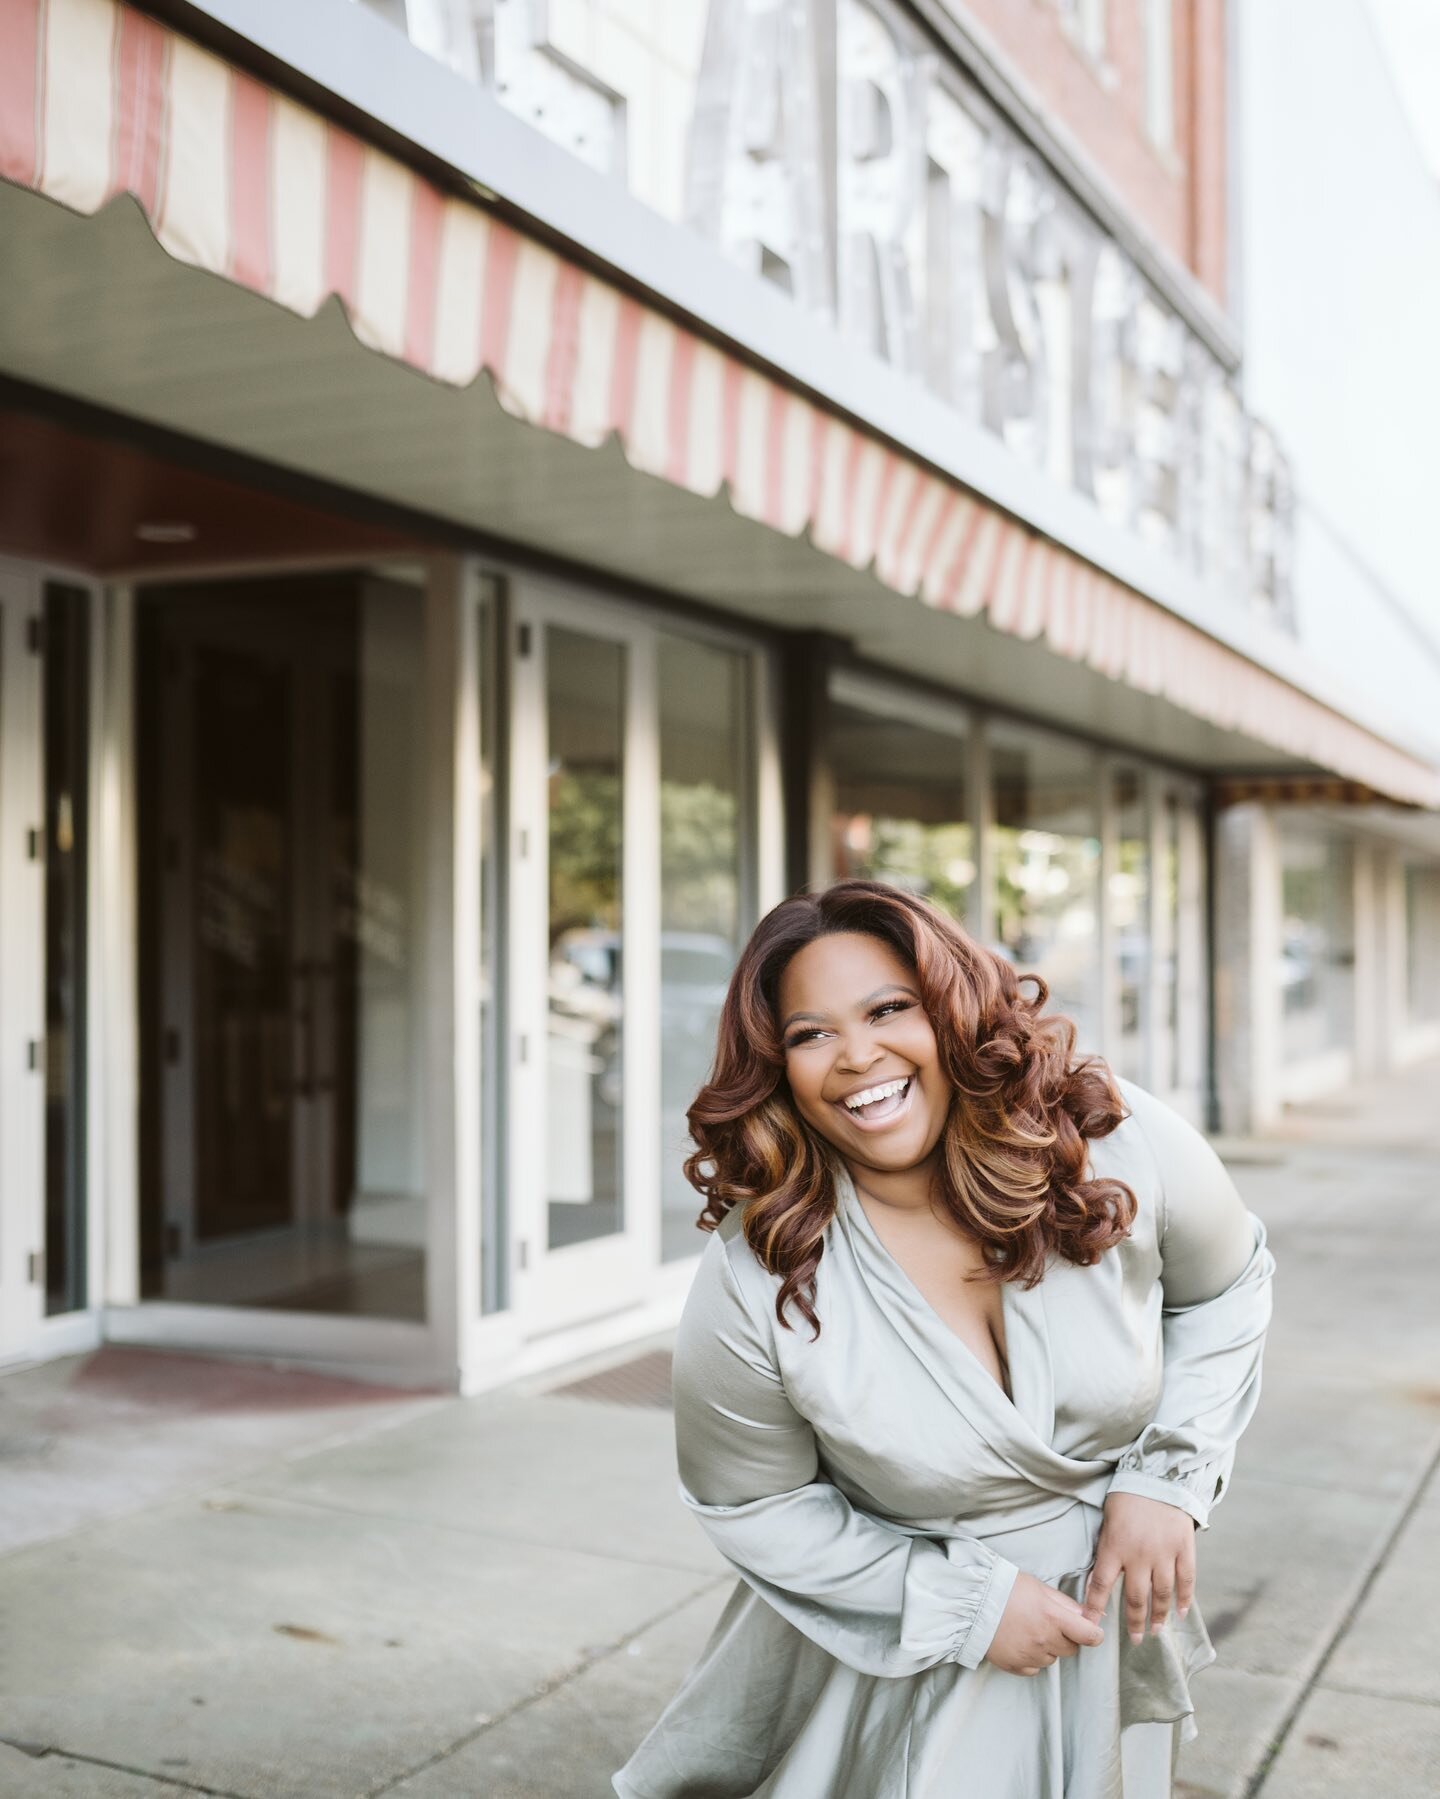 I LOVE how @heycharleeta personality shines through these images. She has such a beautiful spirit! I had such a blast capturing these branding/headshot images for Charleeta.